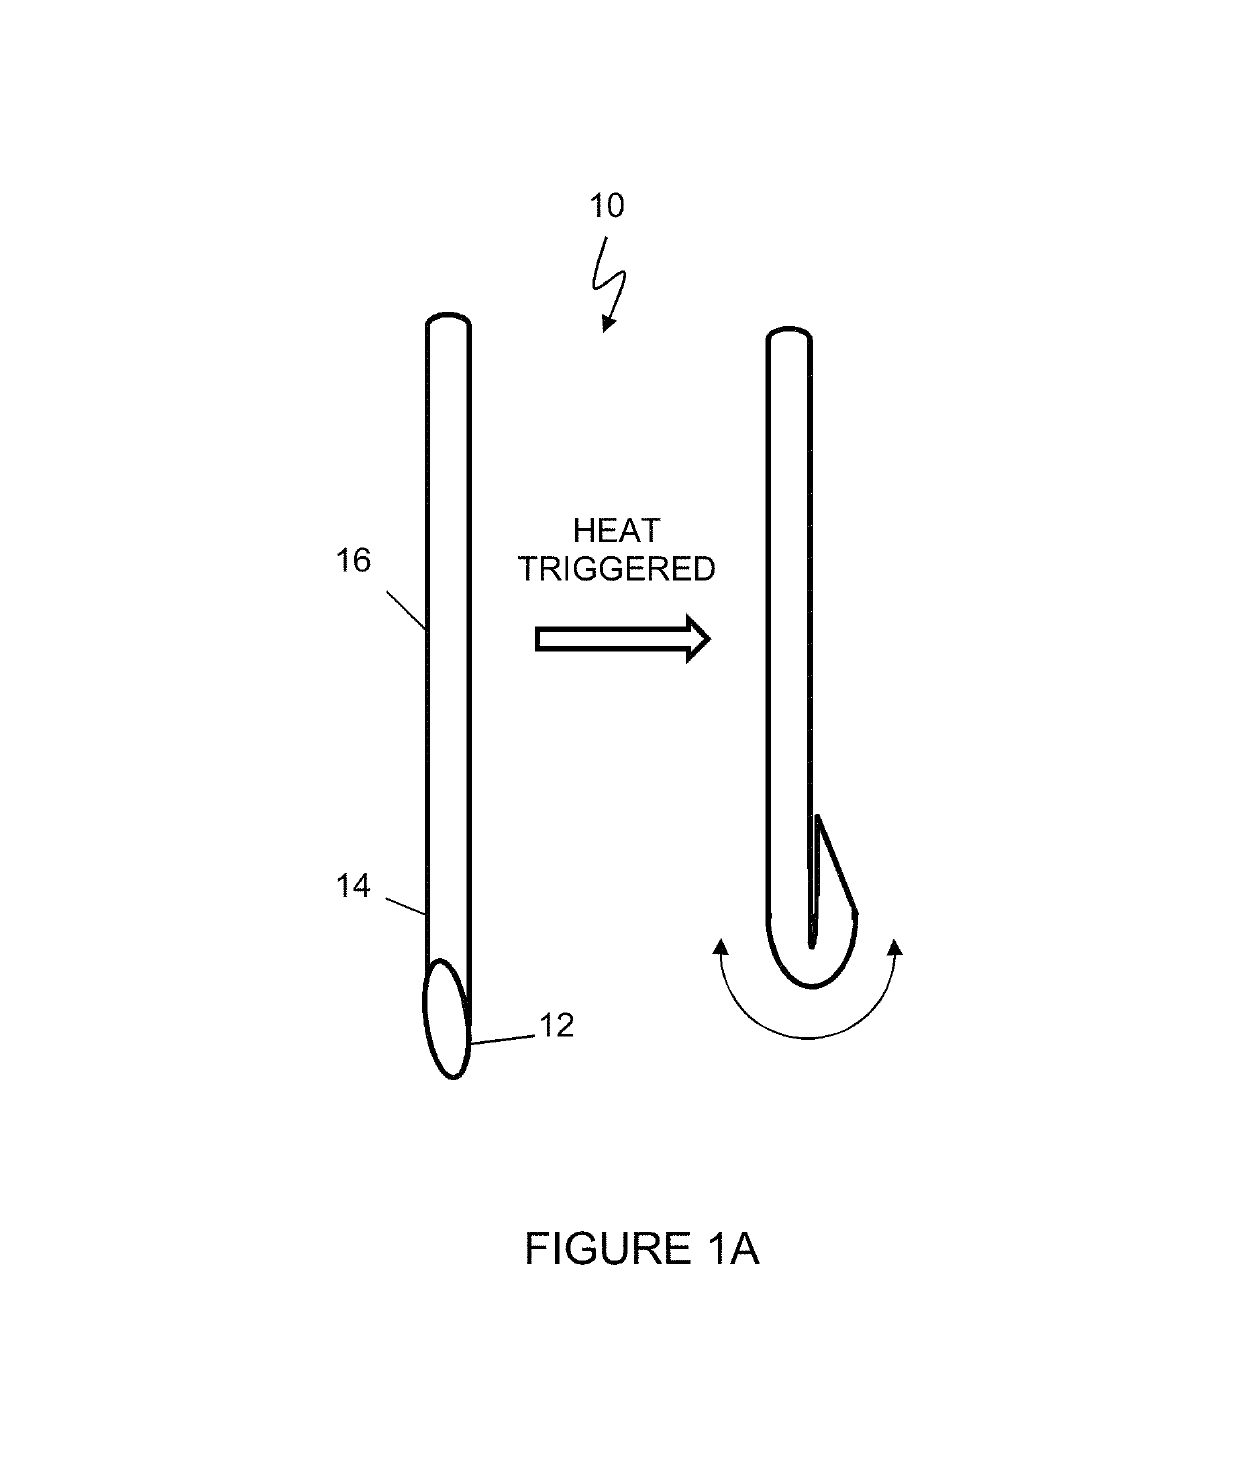 Heat-curling polymeric needle for safe disposal